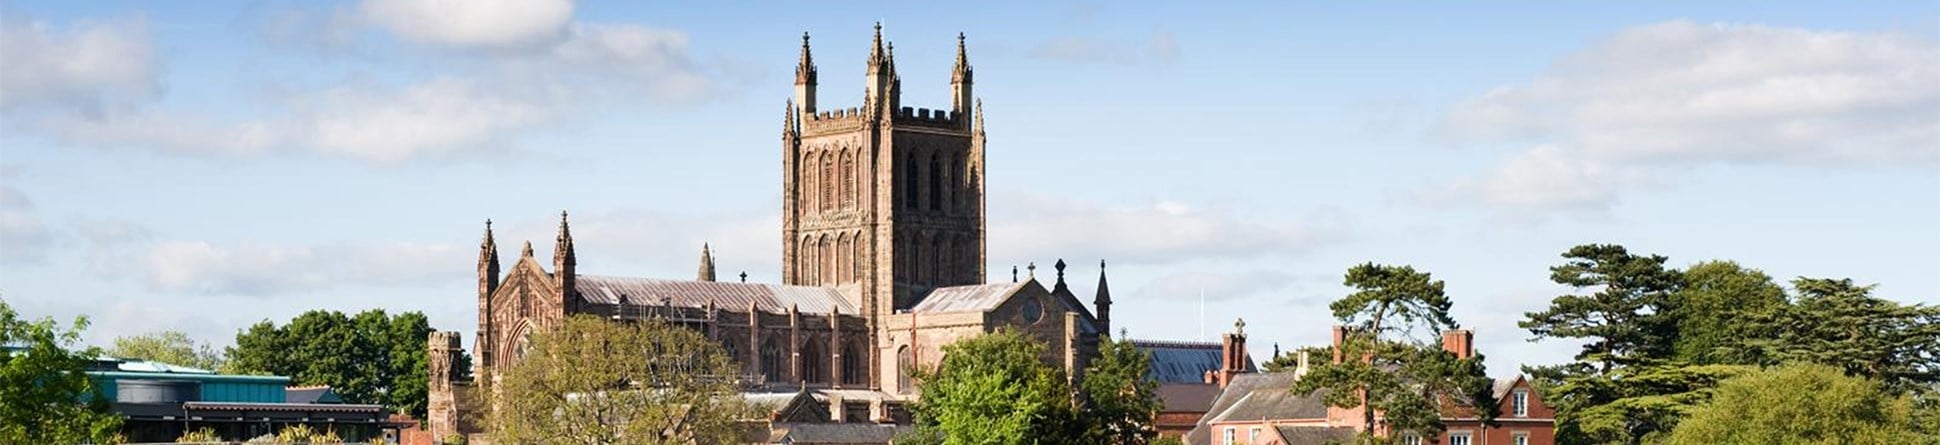 Hereford Cathedral, Hereford.  General view of cathedral.